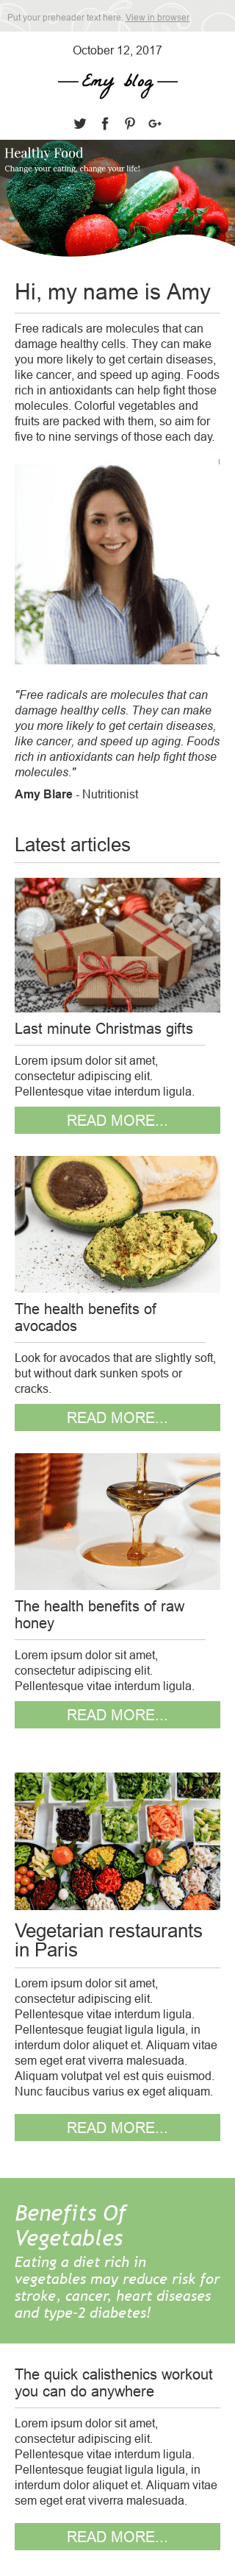 Promo Email Template "Healthy Foods" for Publications & Blogging industry mobile view